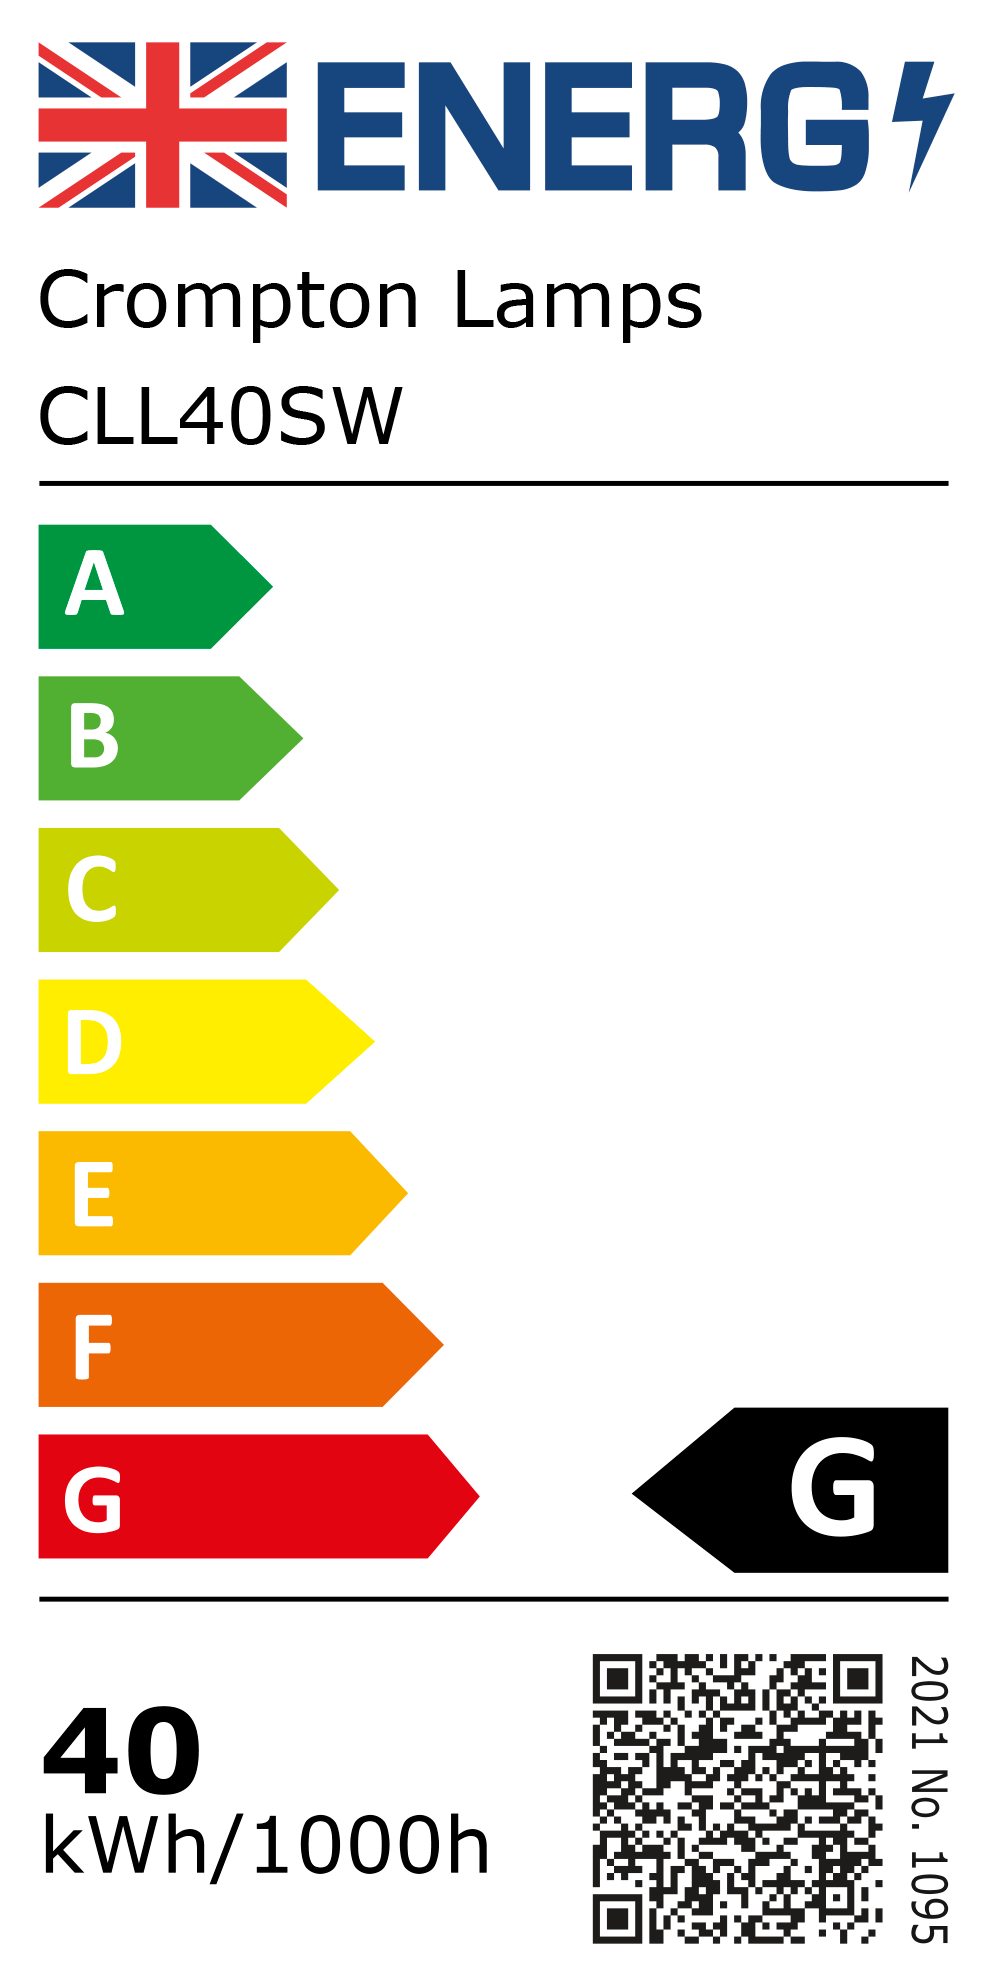 New 2021 Energy Rating Label: Stock Code CLL40SW